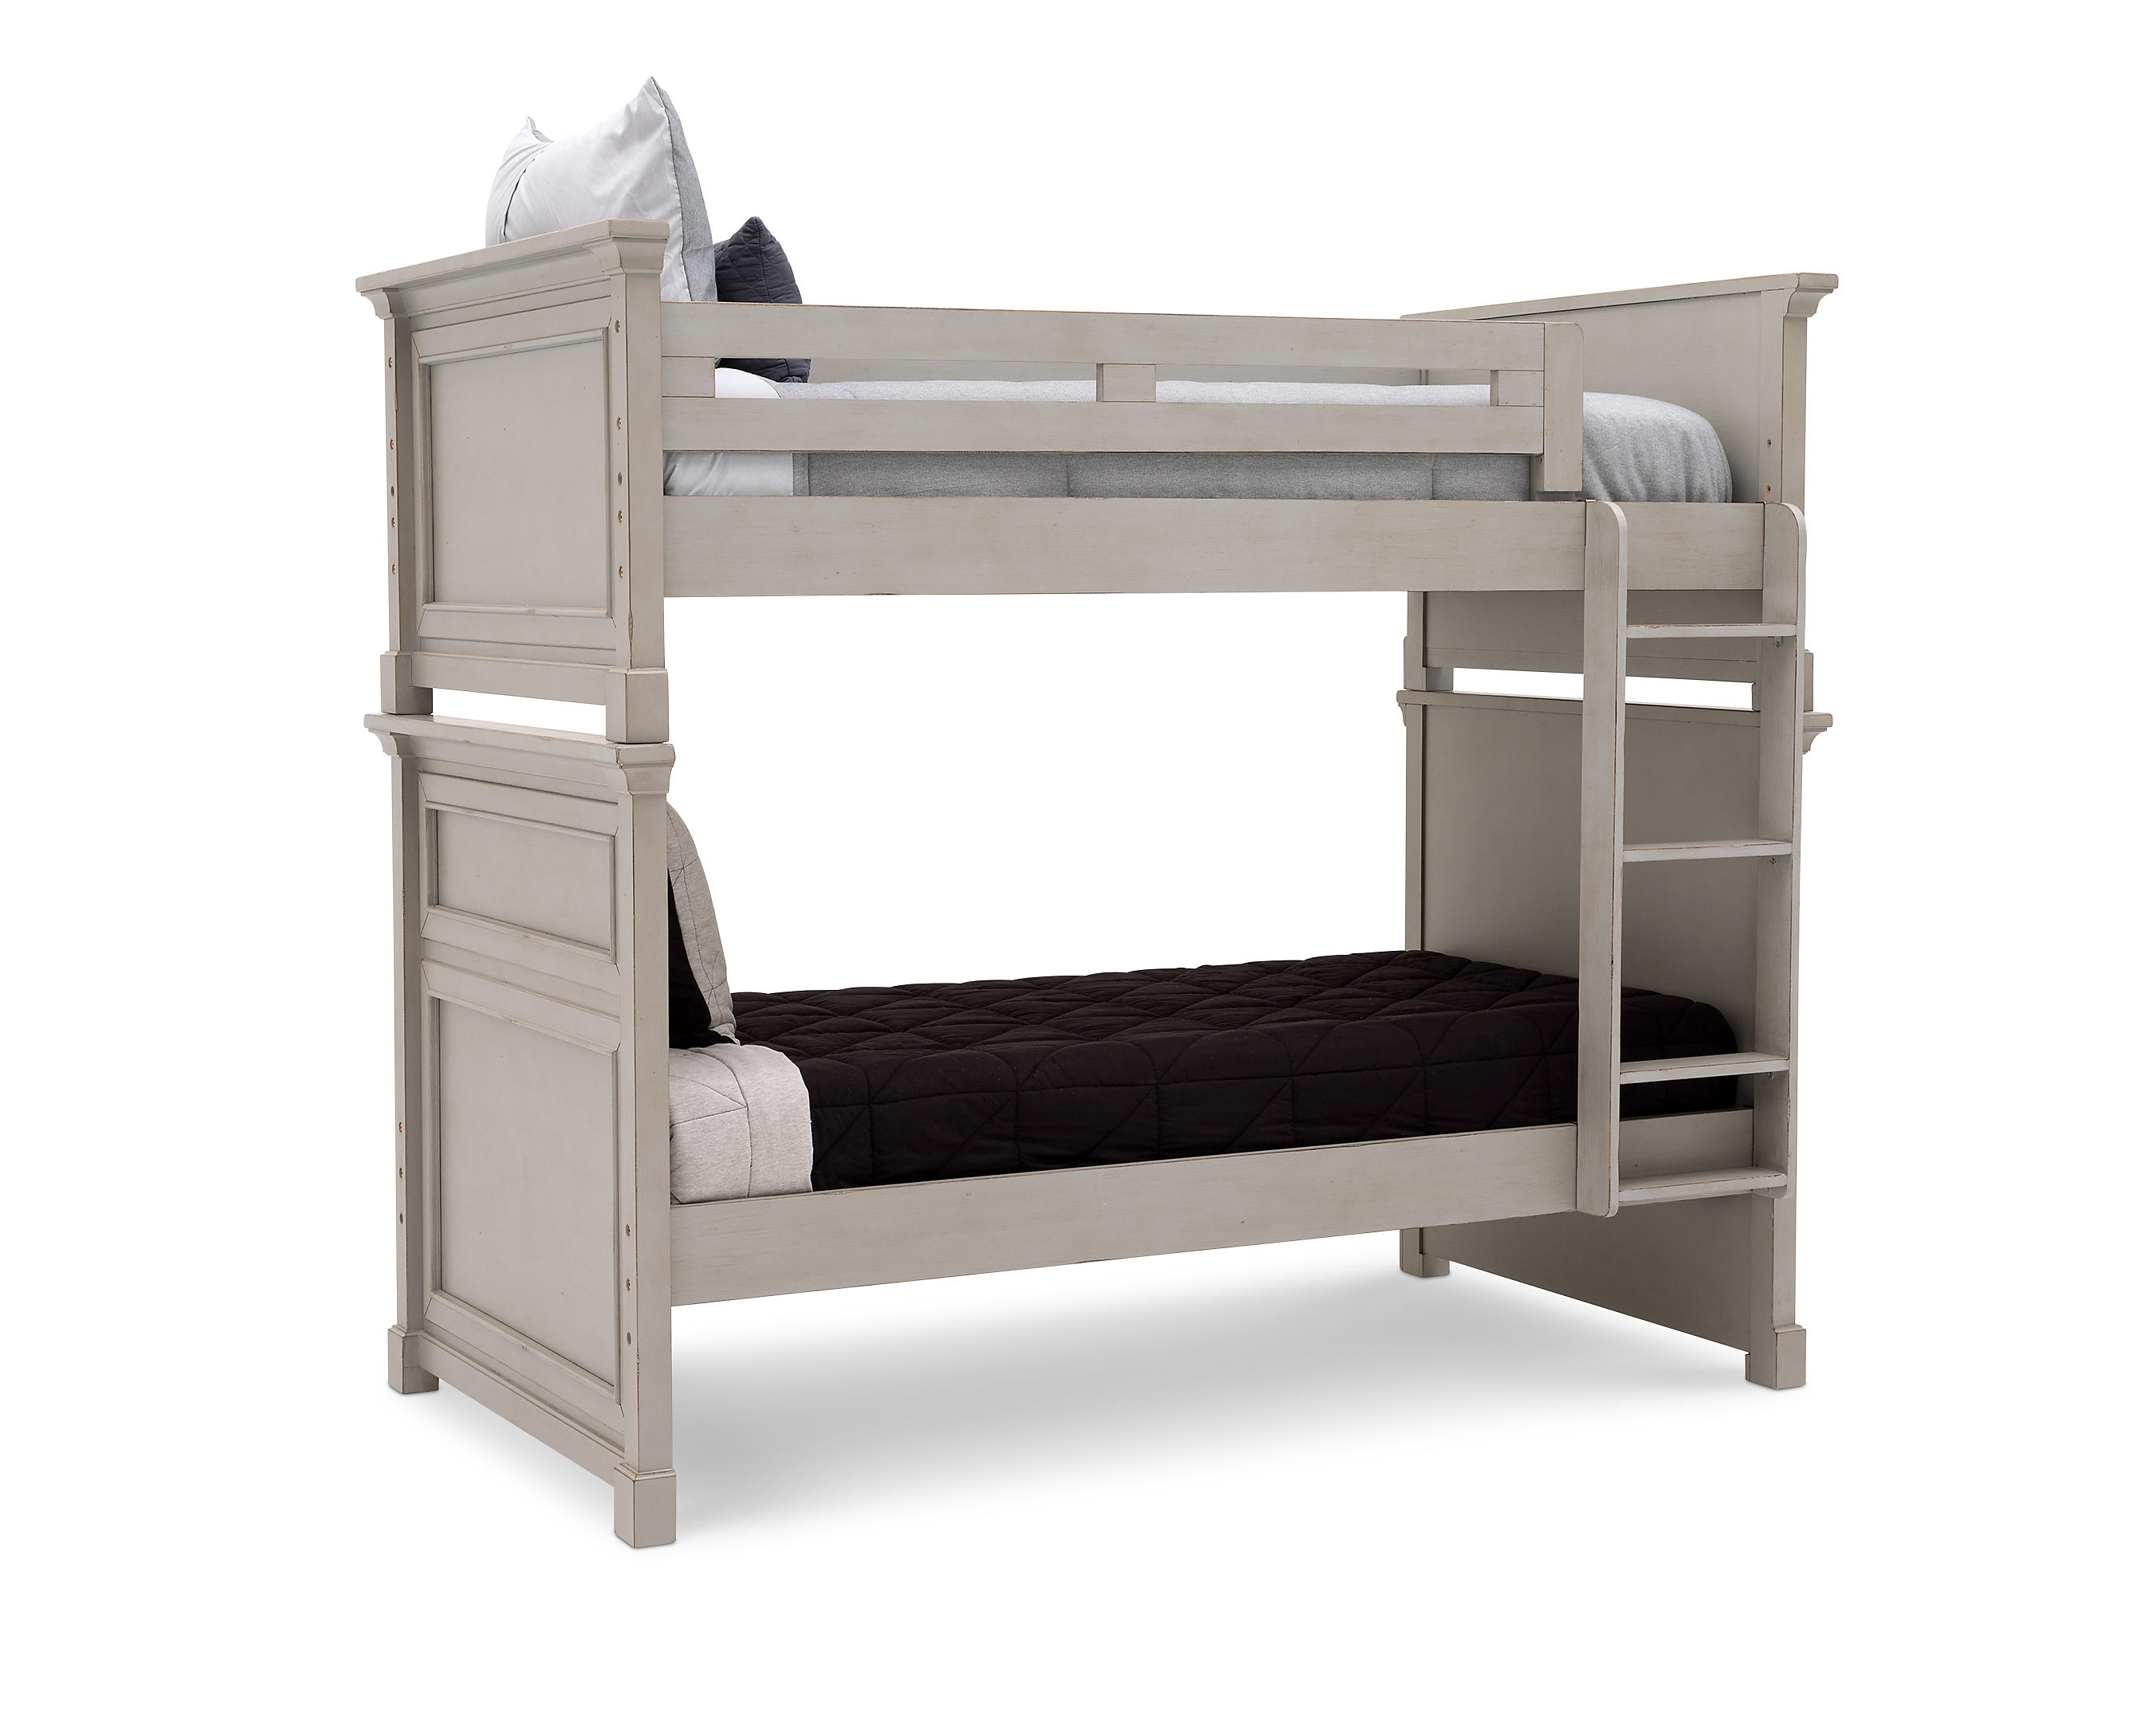 Stoney Creek Twin Over Bunk Bed, Furniture Row Bunk Beds